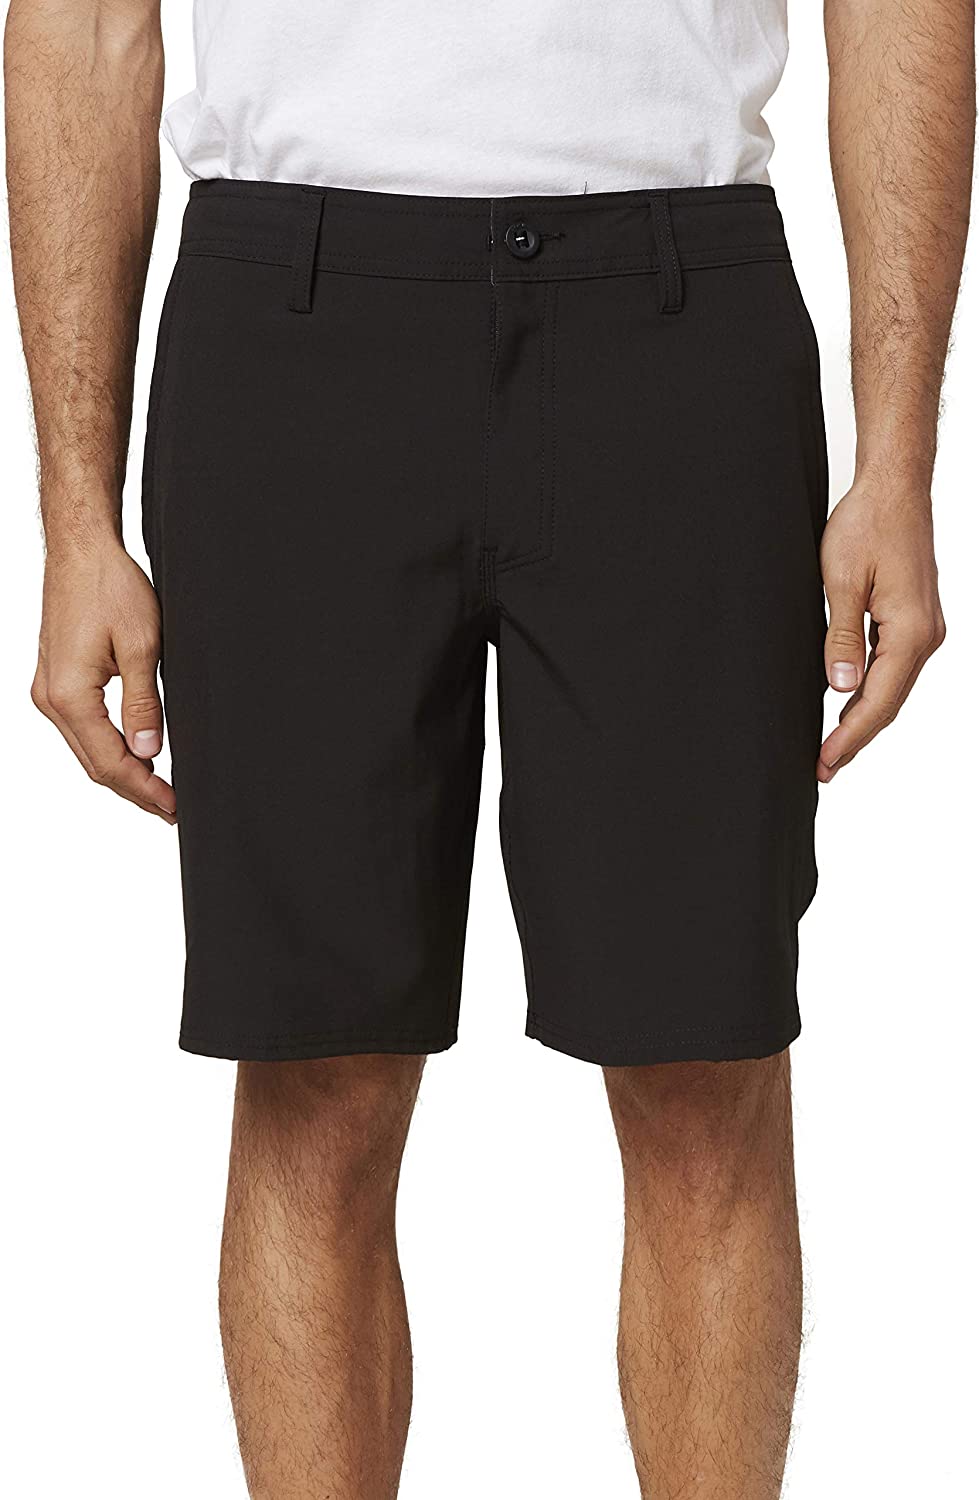 19 Inch Outseam Mid-Length Short O'NEILL Men's Water Resistant Hybrid Stretch Walk Short 